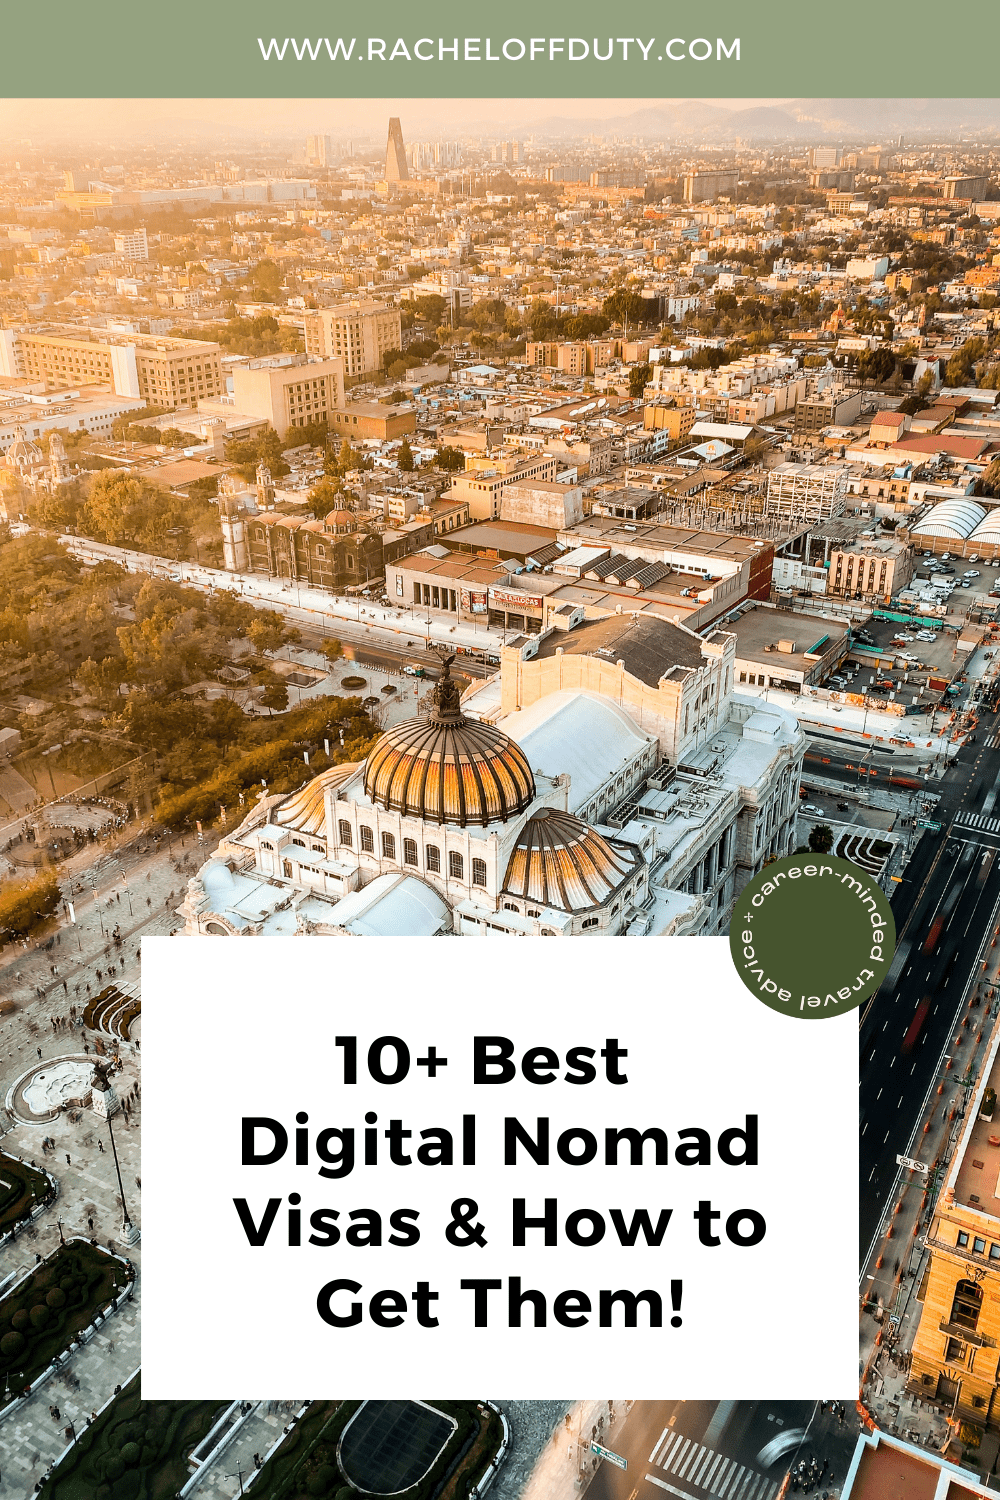 Rachel Off Duty: 10 Countries with Digital Nomad Visas and How to Get Them